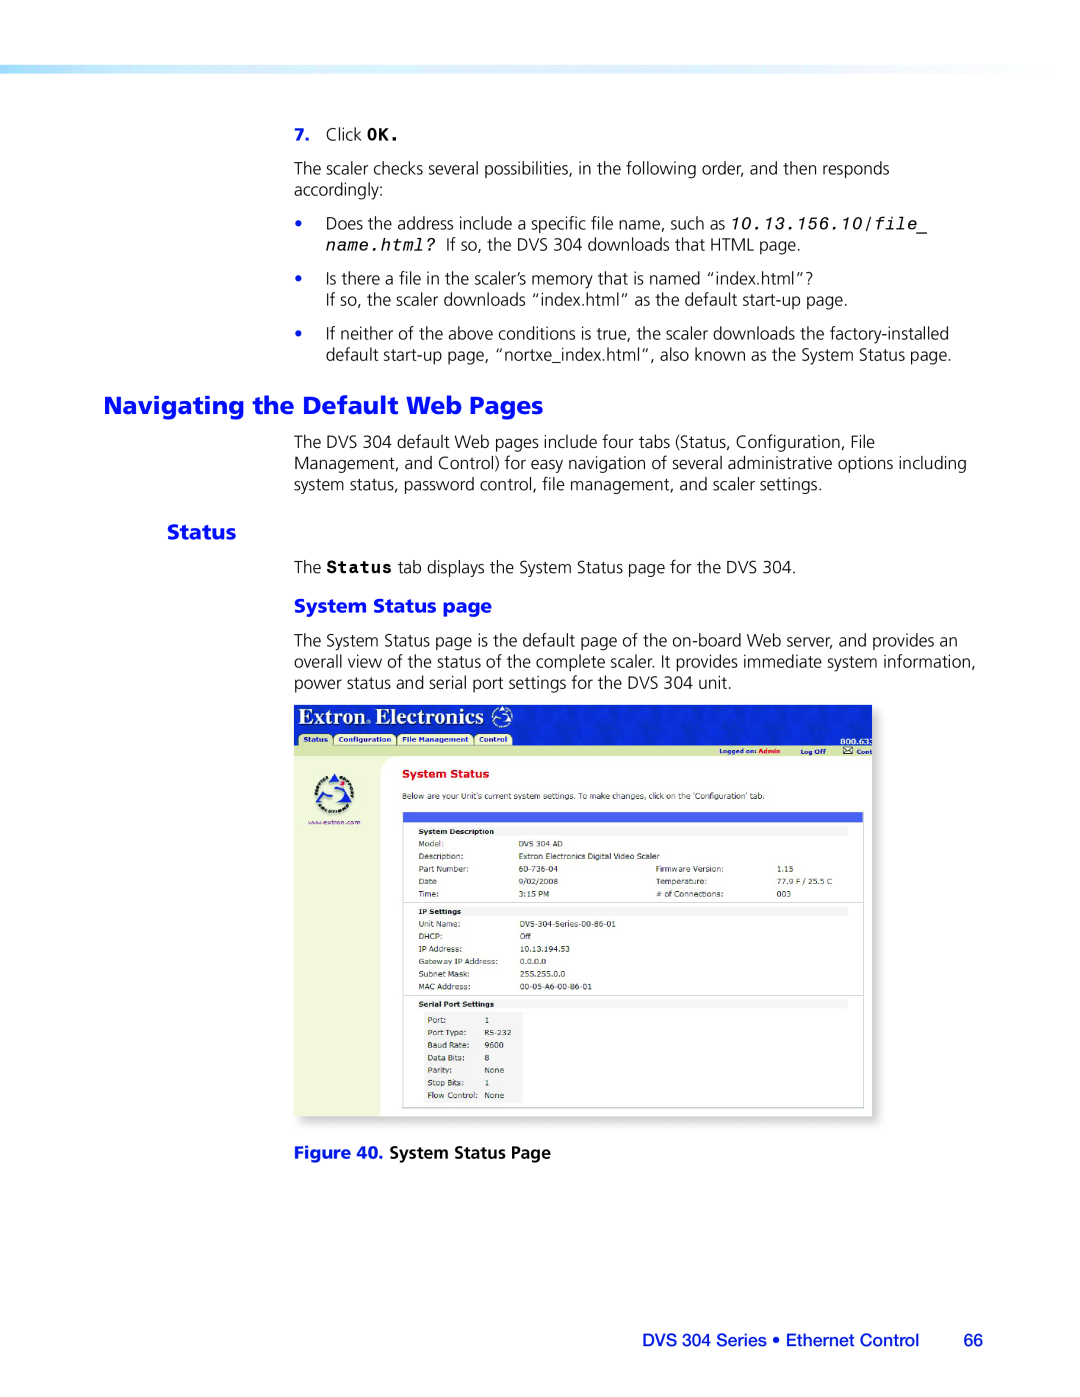 Extron electronic manual Navigating the Default Web Pages, Status, DVS 304 Series • Ethernet Control 